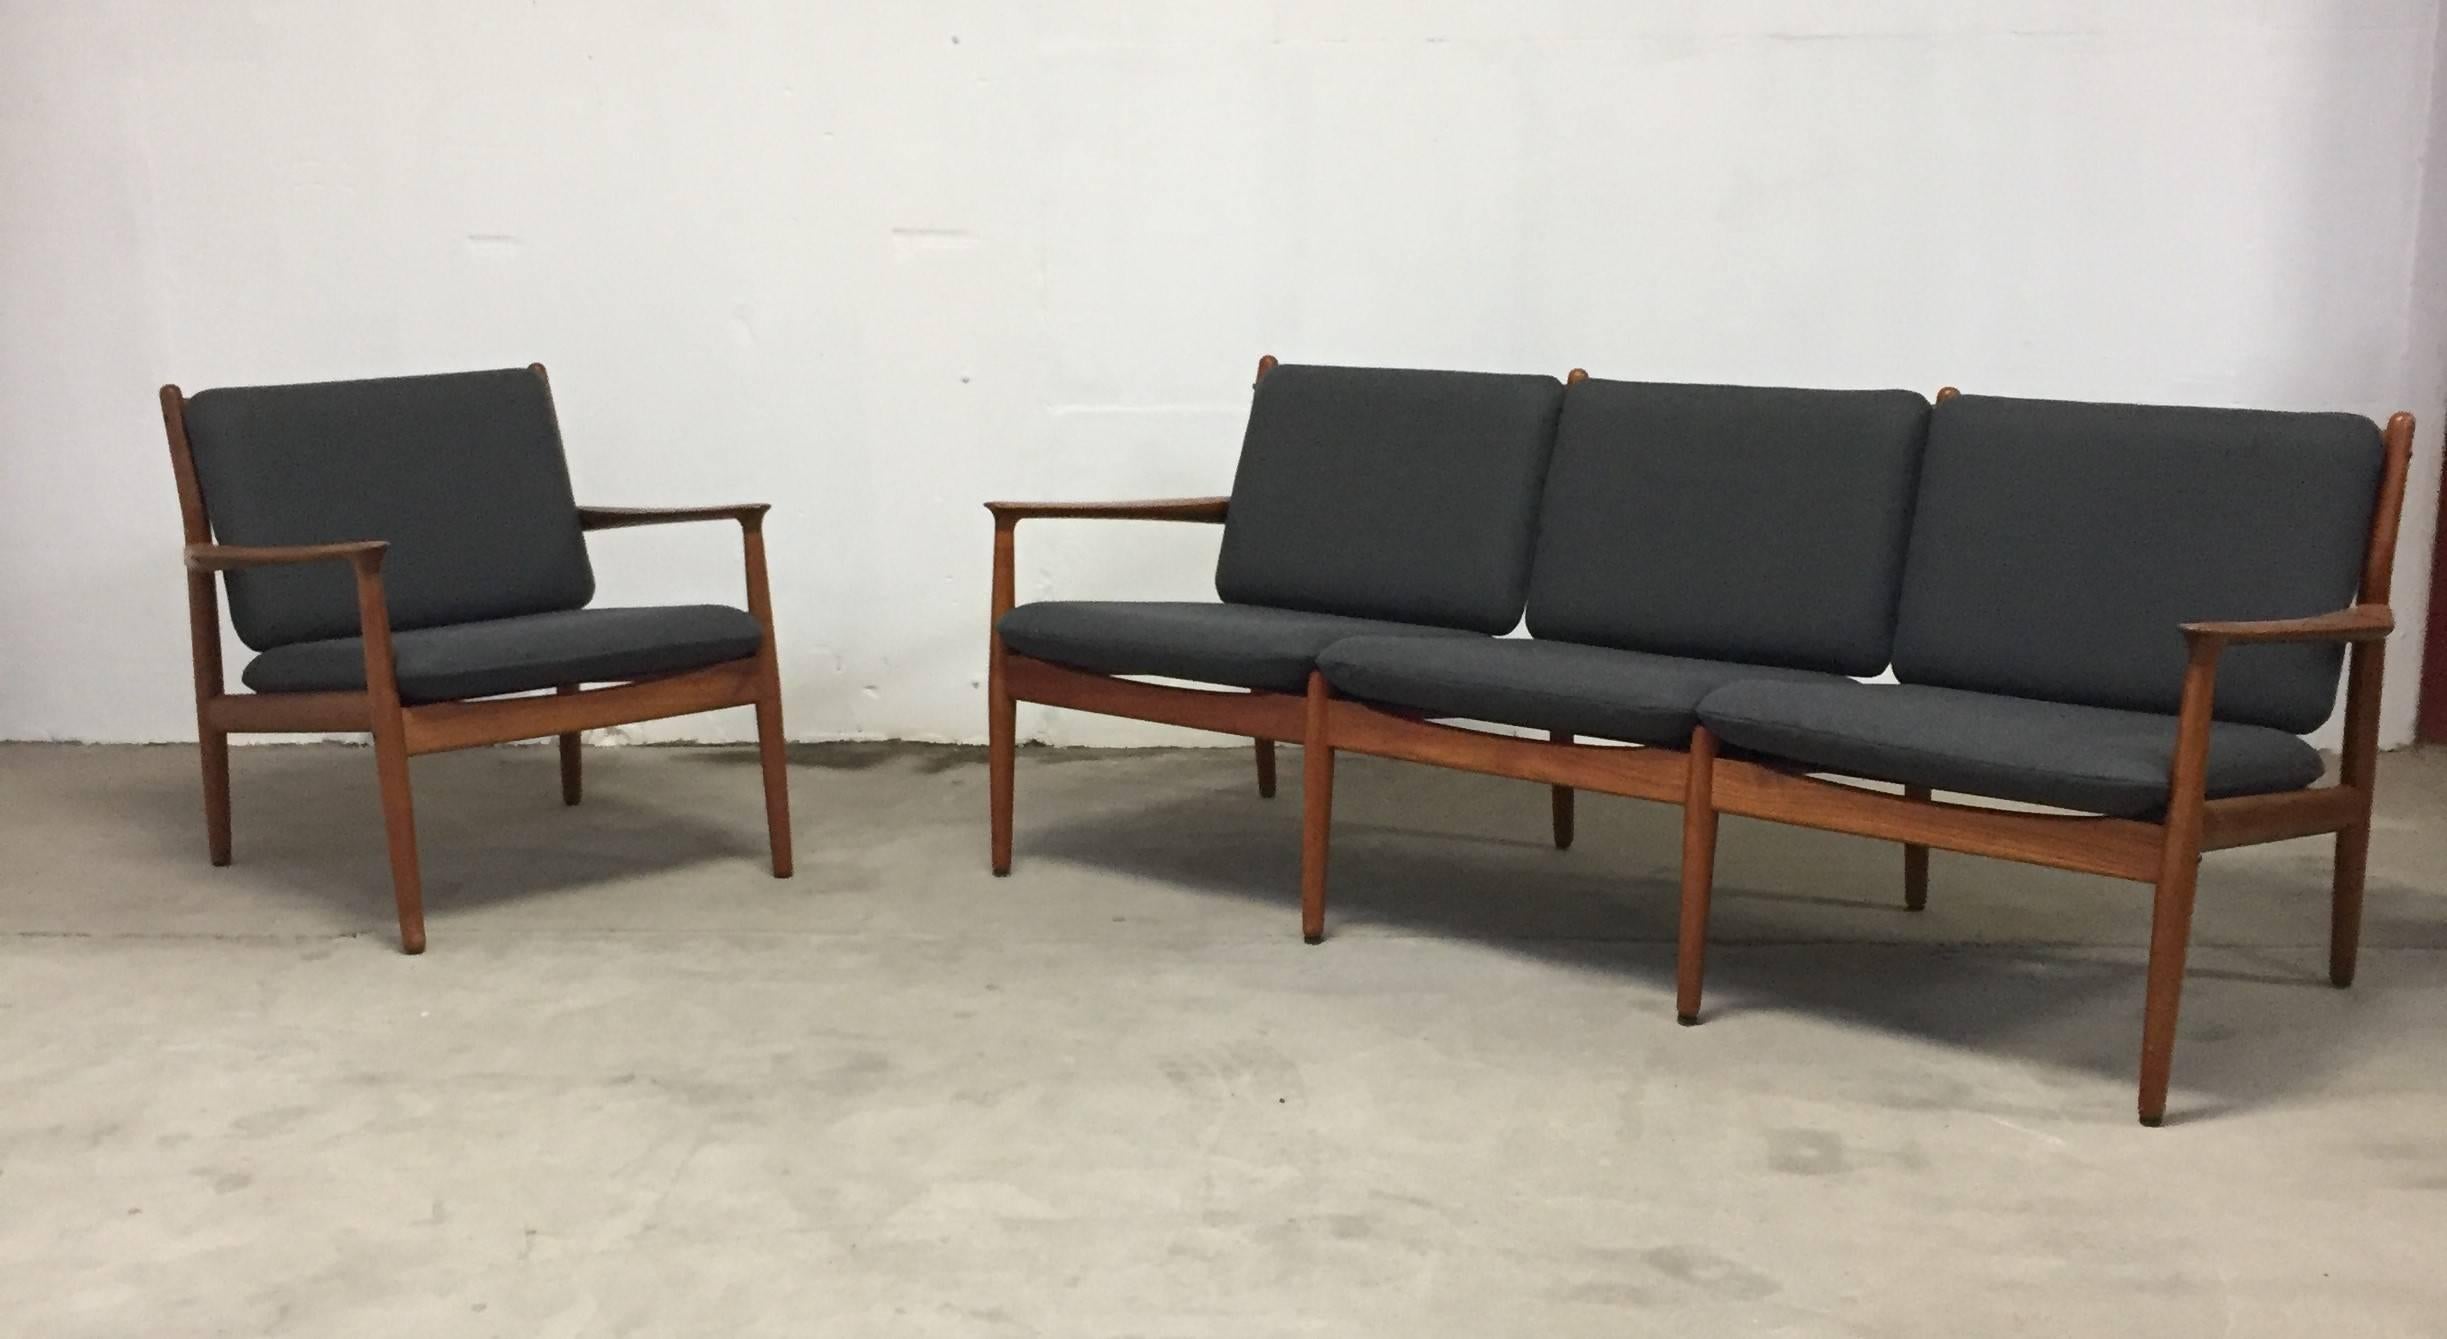 Beautiful Danish modern lounge sofa designed by Grete Jalk for Glostrup Møbelfabrik in the 1960s.

The typical clear, light and elegant lines in the design from Grete Jalk. 

Solid teak frames and both are reupholstered with grey whool. 
The